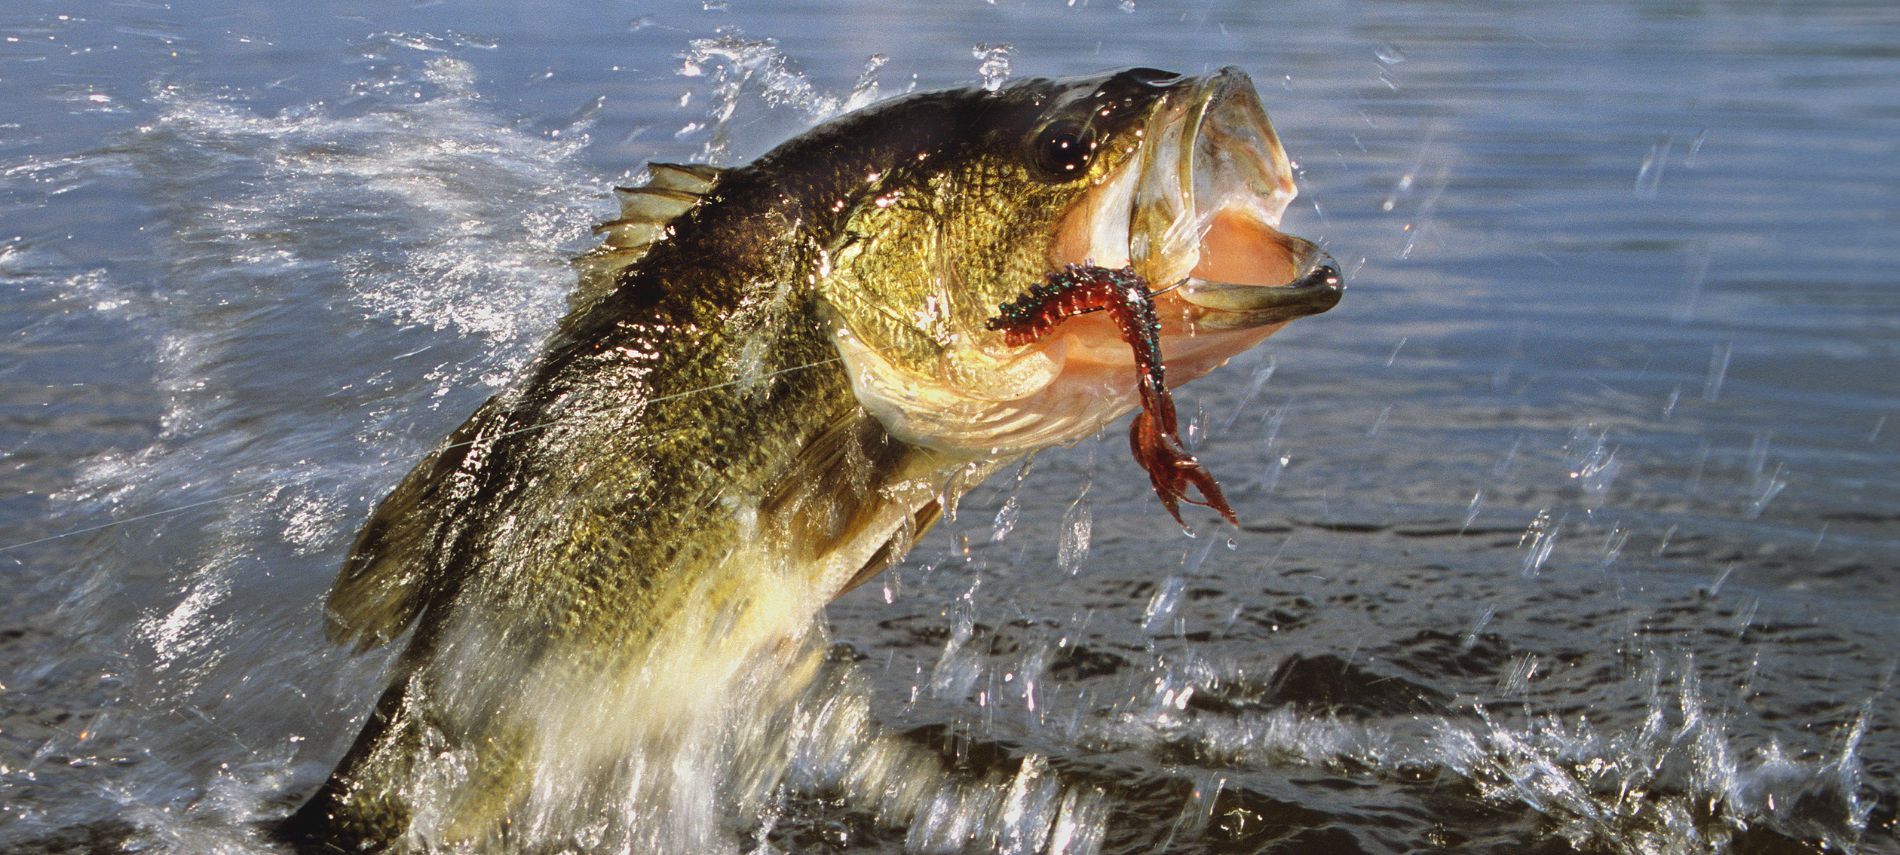 Large mouth bass leaping out of the water after some bait. 